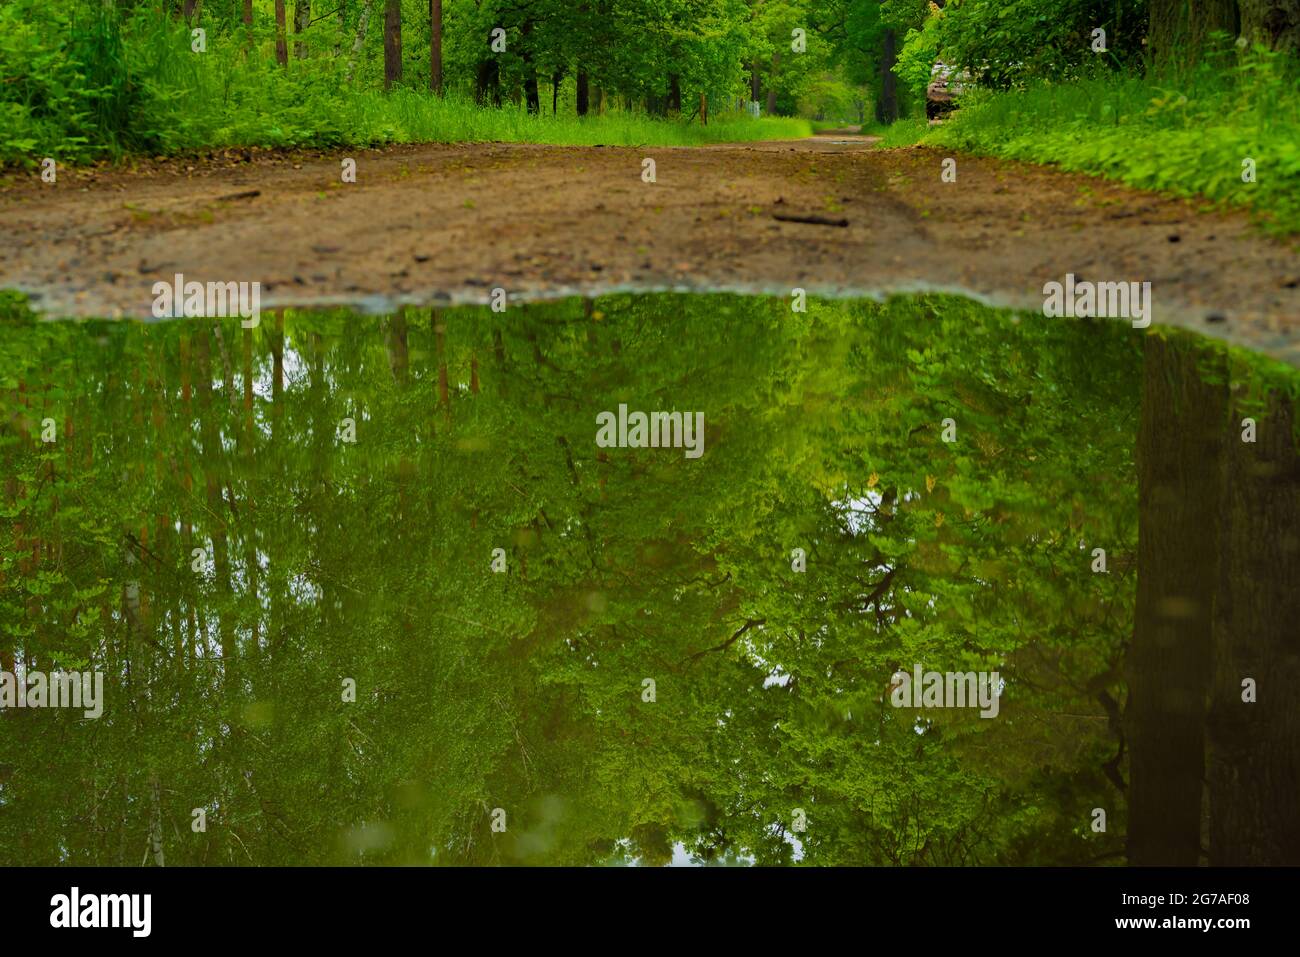 Forest road in spring in a beautiful green forest,  foreground water reflections in a large puddle Stock Photo